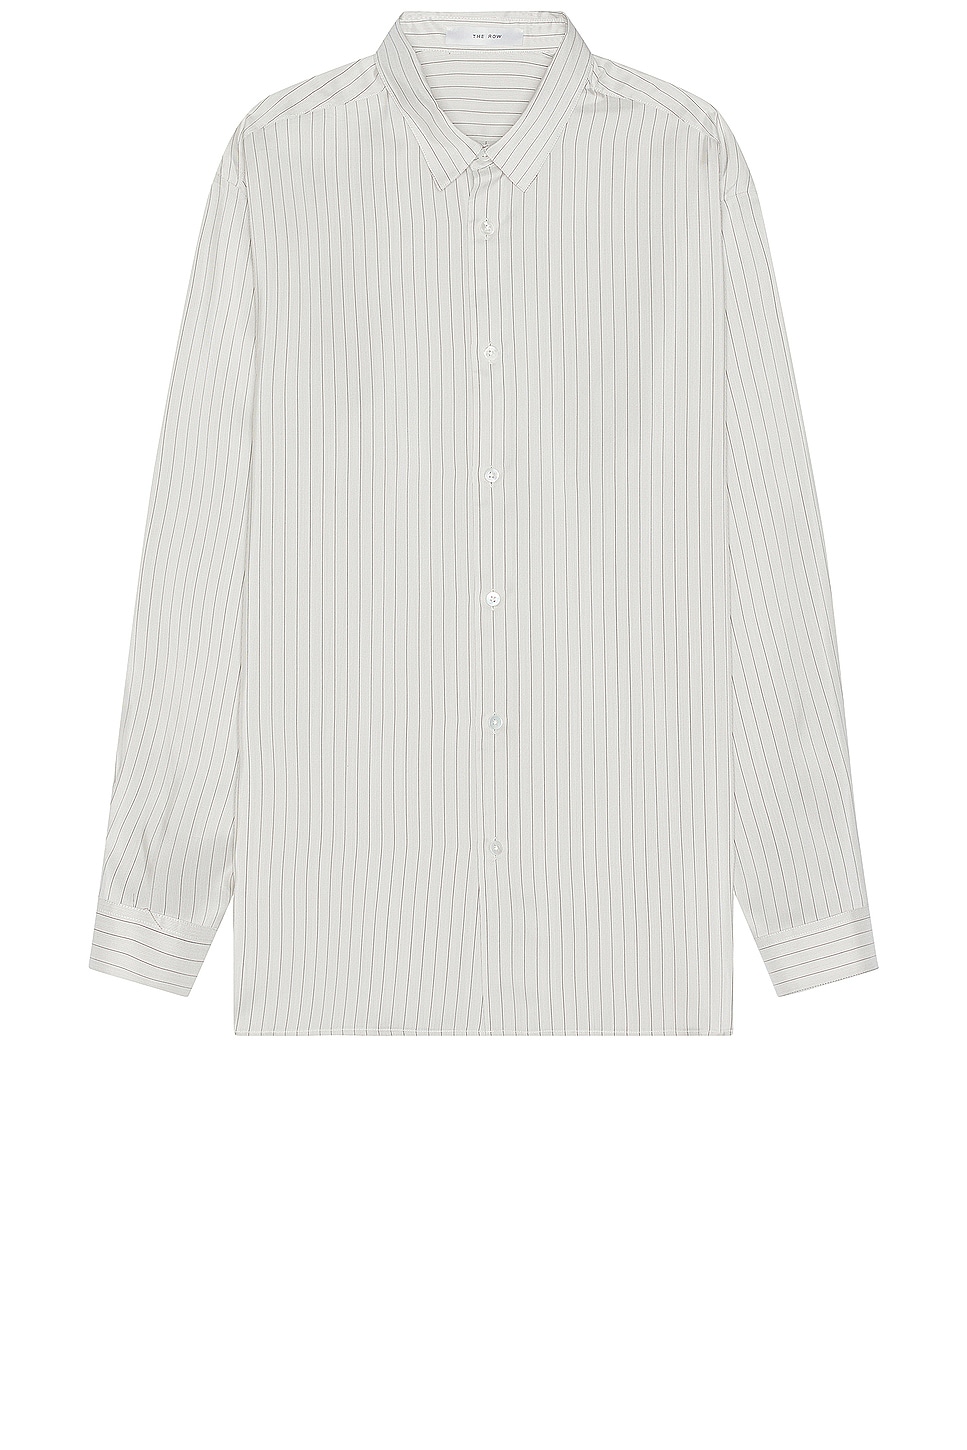 Image 1 of The Row Albie Shirt in Grey Stripe